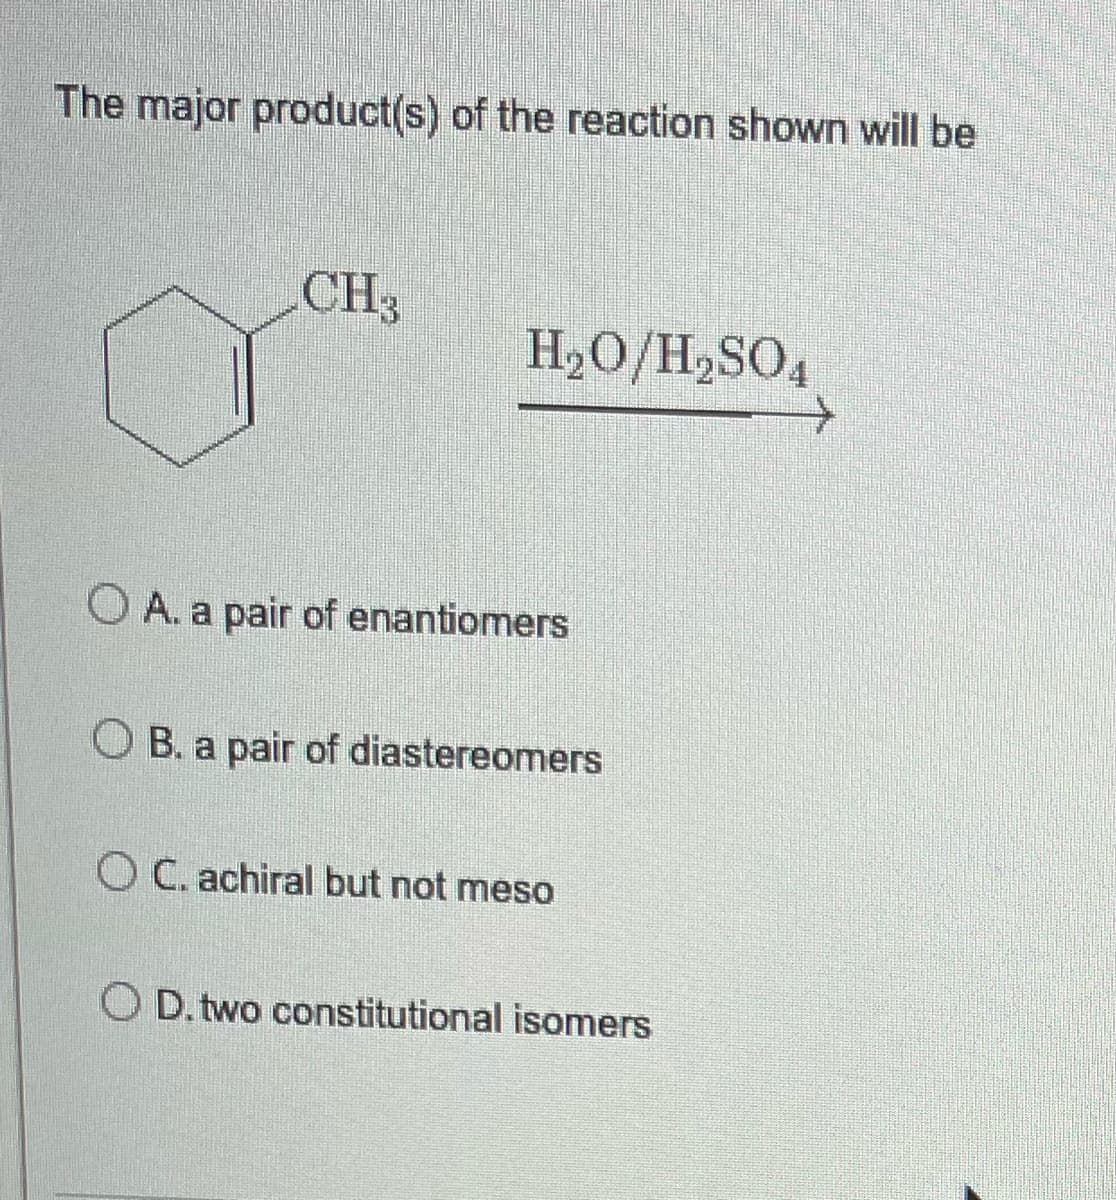 The major product(s) of the reaction shown will be
CH3
H₂O/H₂SO4
OA. a pair of enantiomers
B. a pair of diastereomers
OC. achiral but not meso
OD. two constitutional isomers